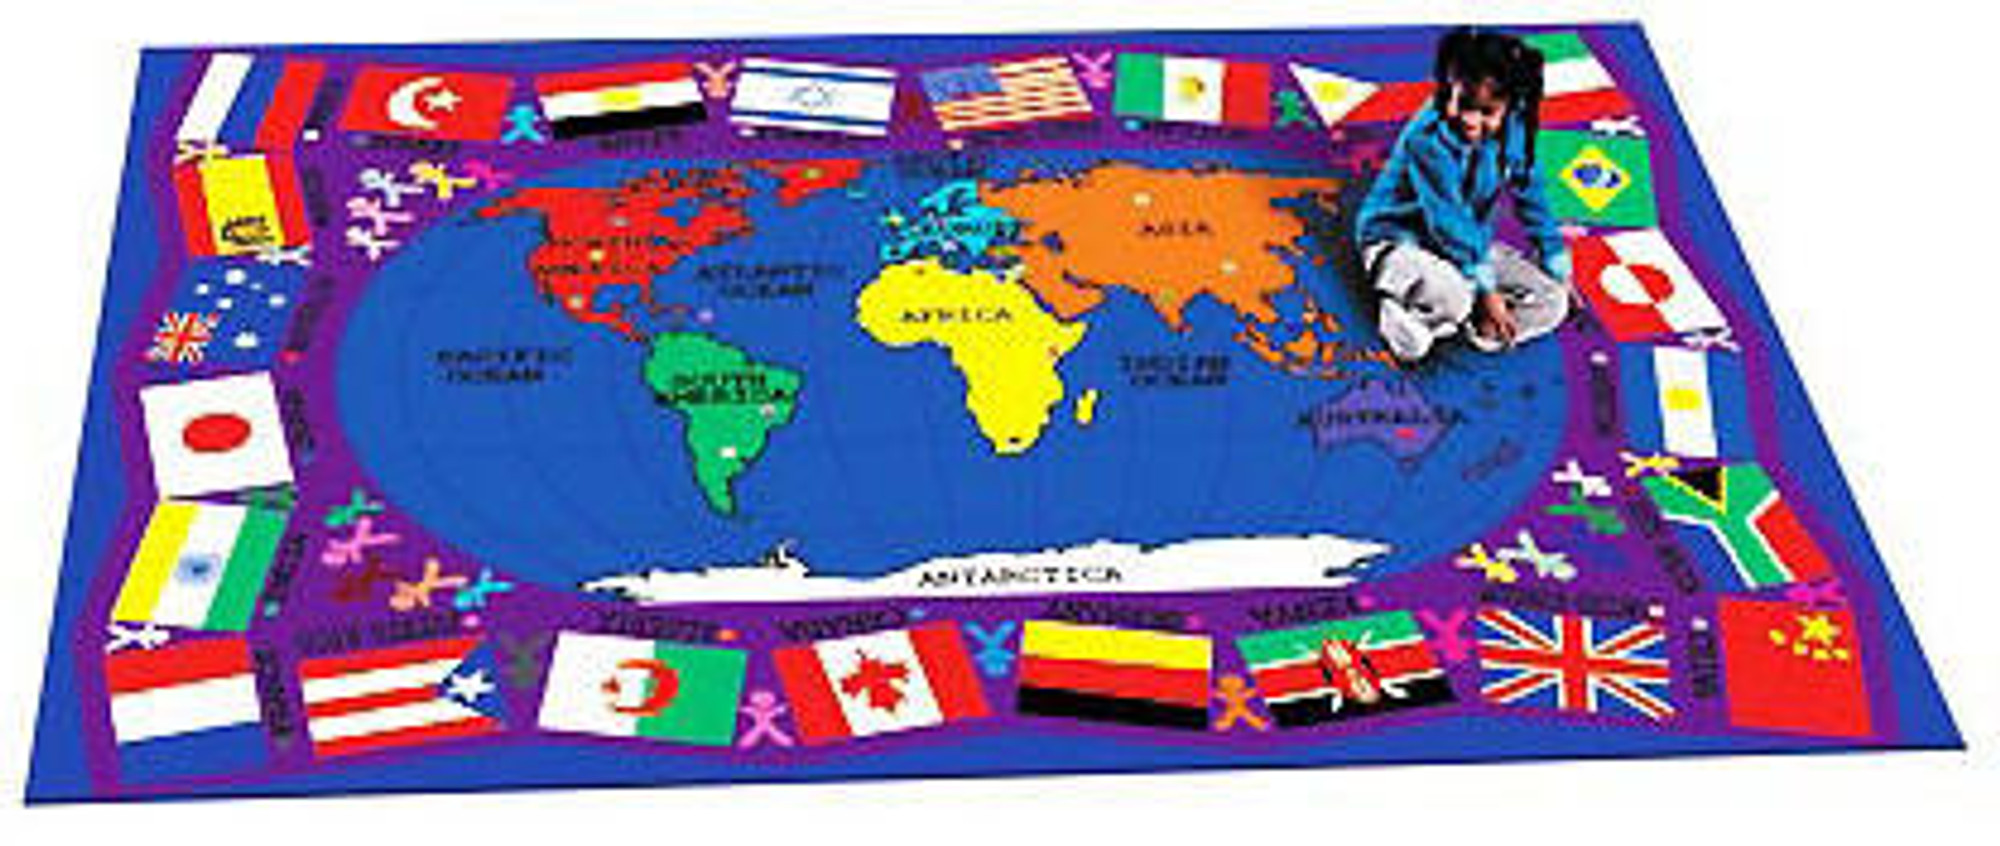 Flags of the World rug, image 1, World Maps Online